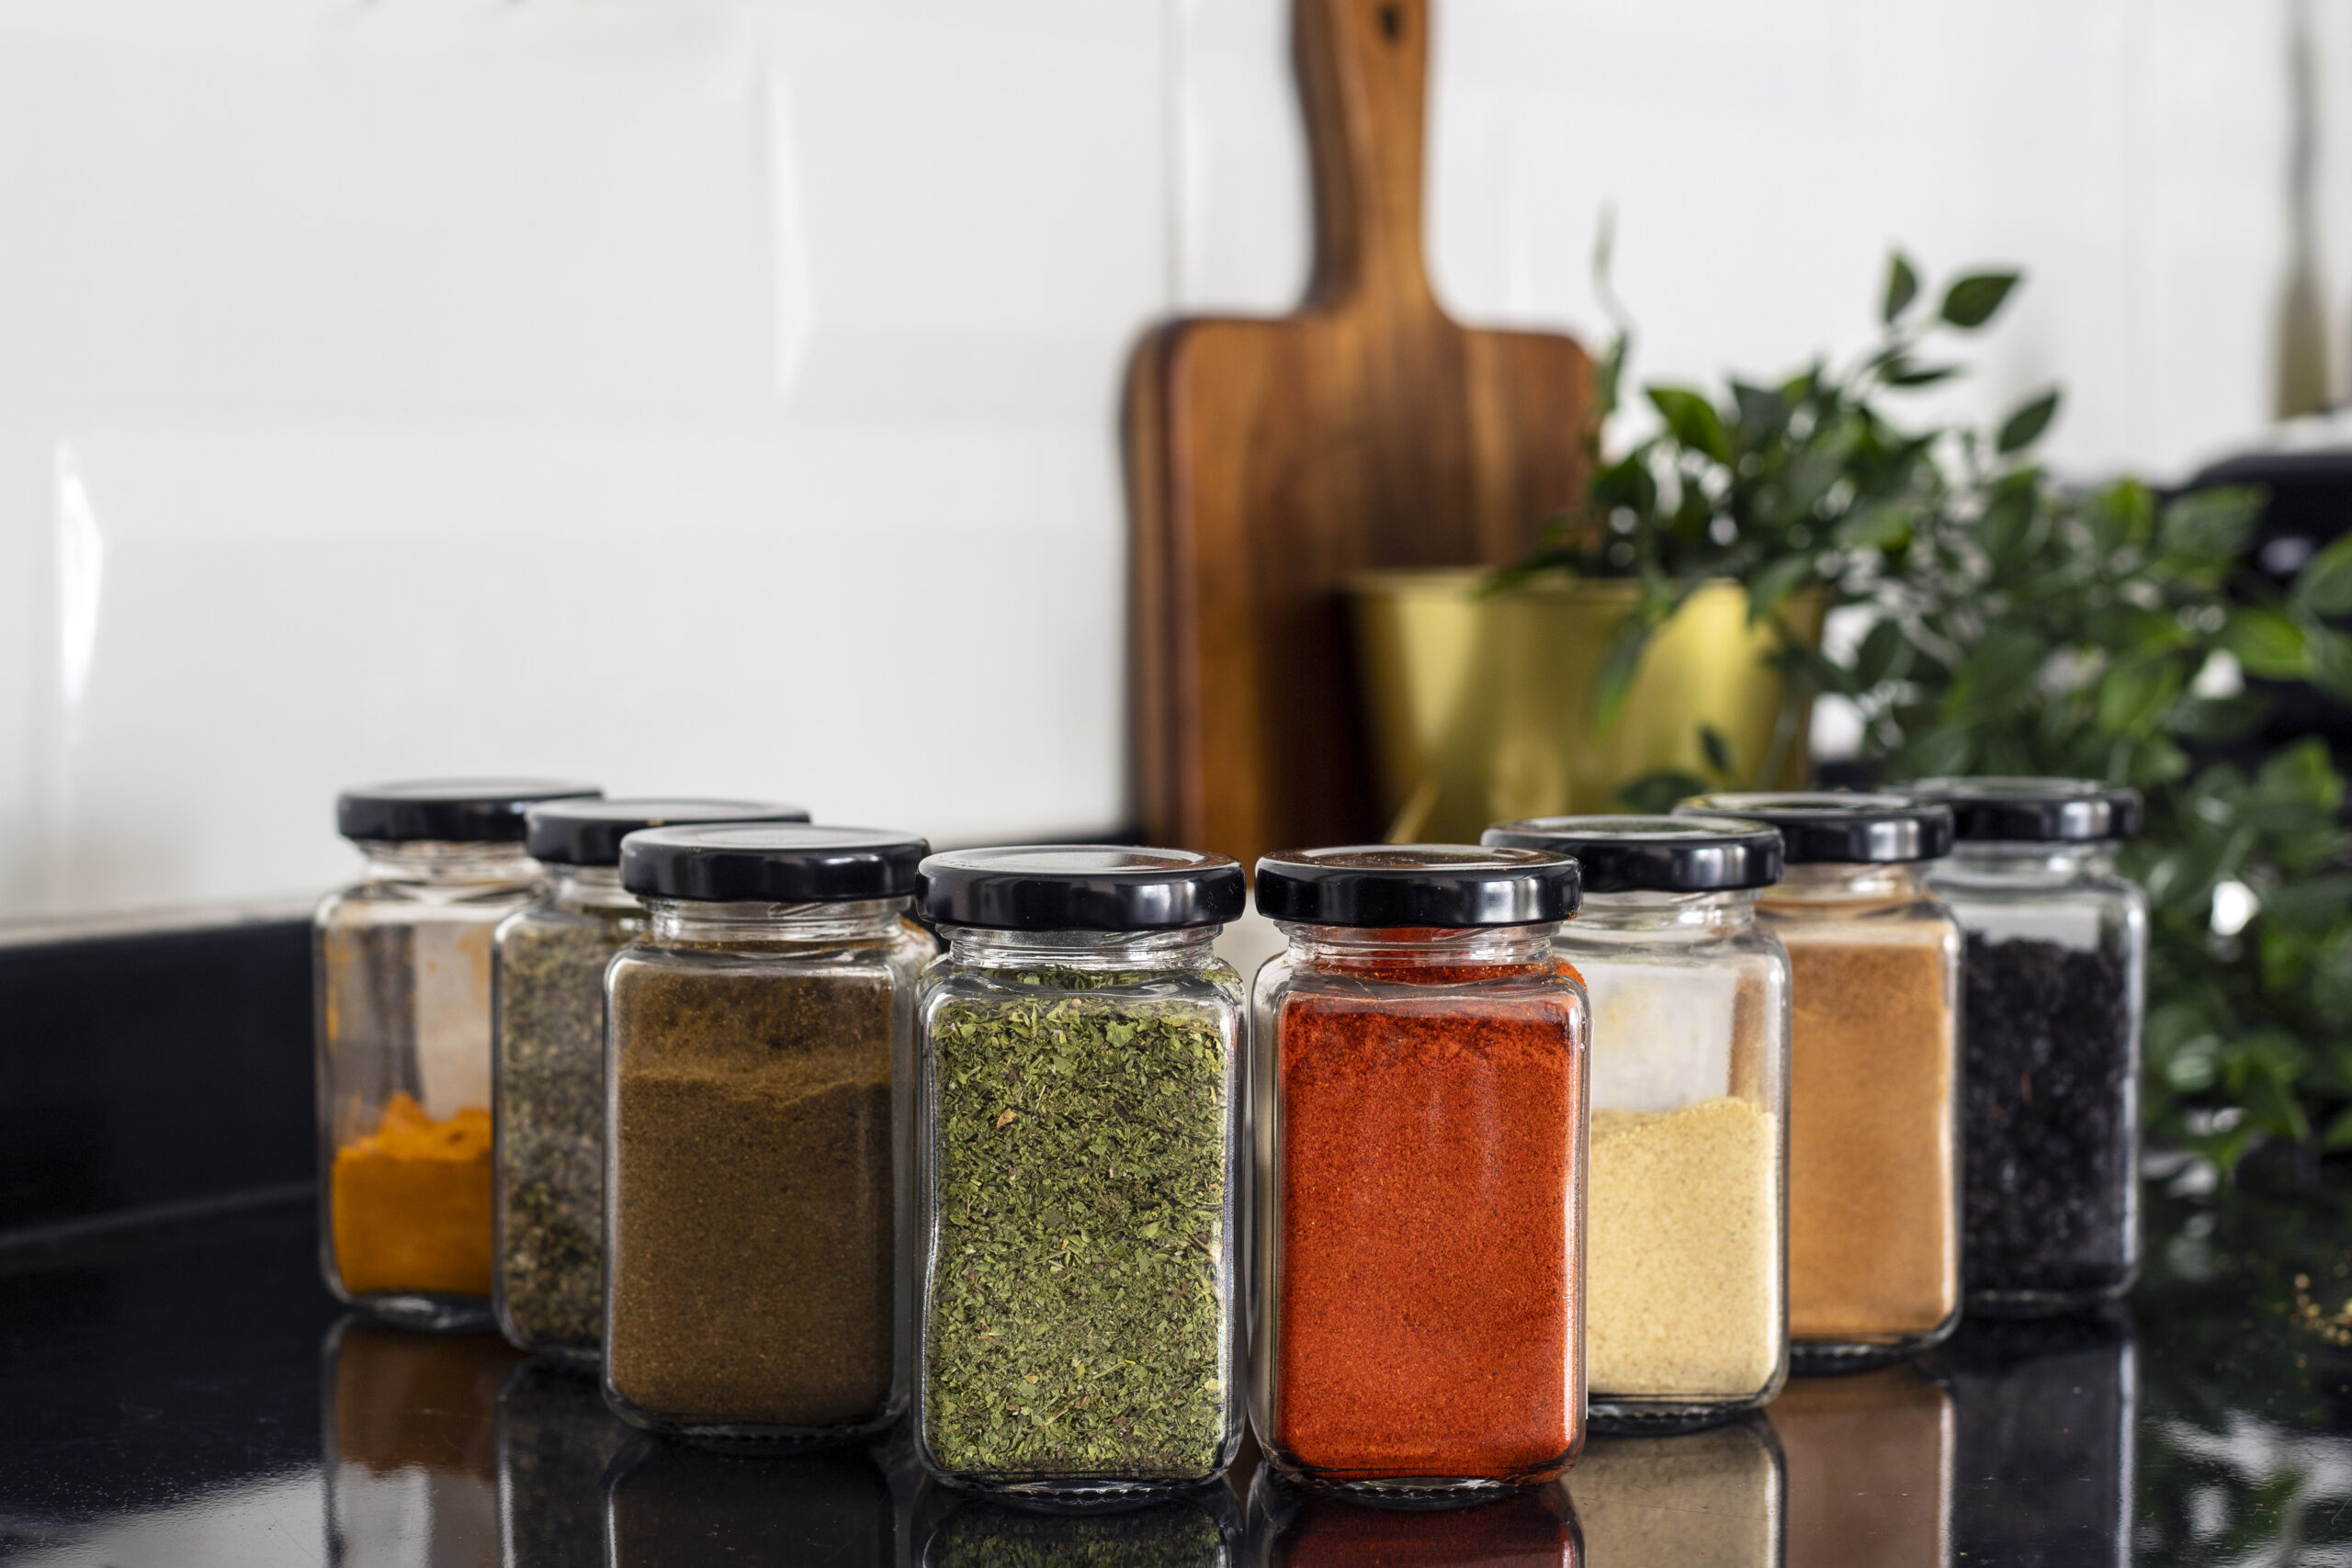 Various dried spices in glass jars